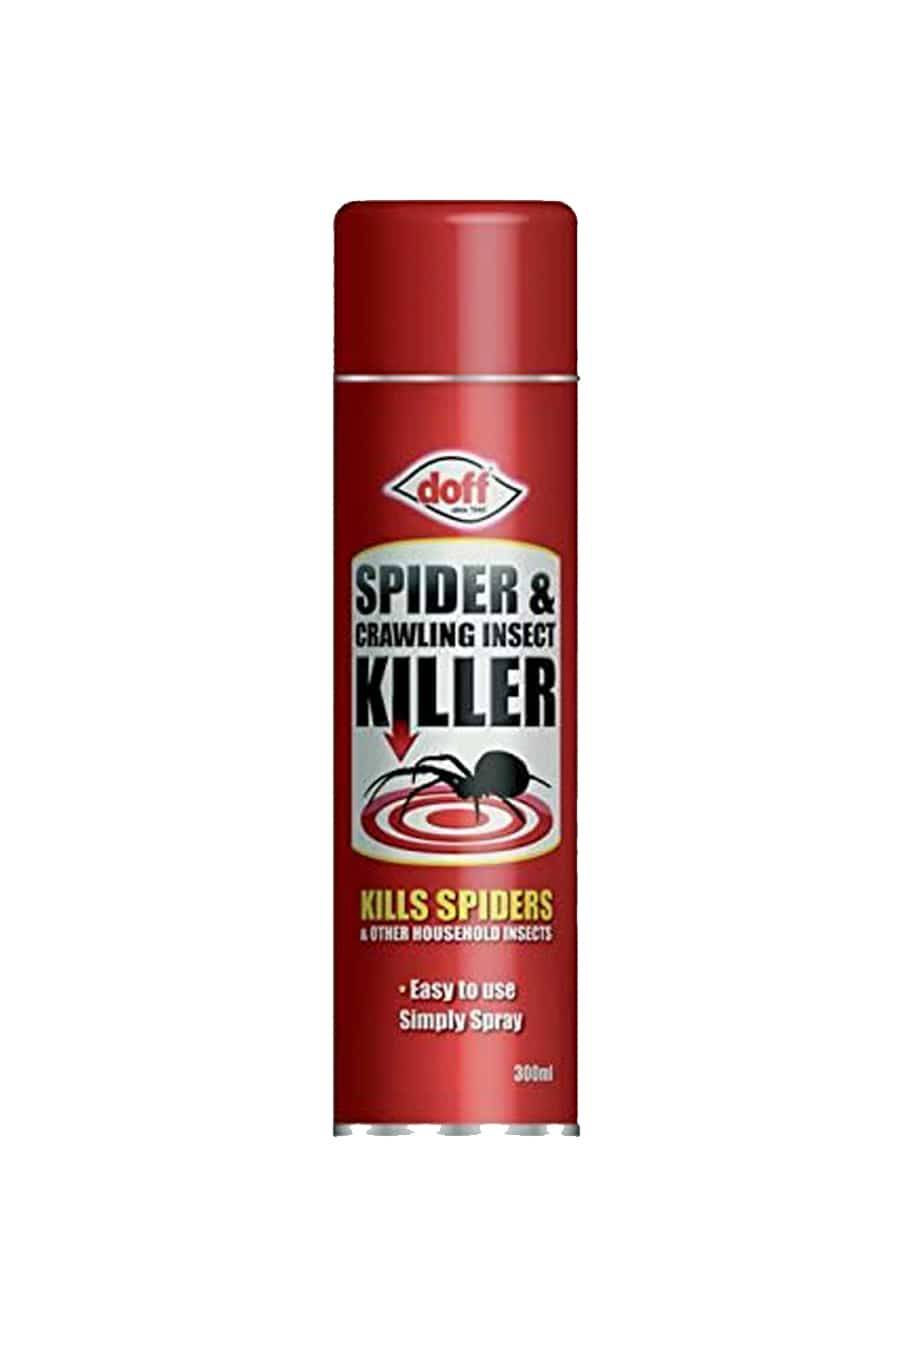 Doff Spider & Crawling Insect Killer